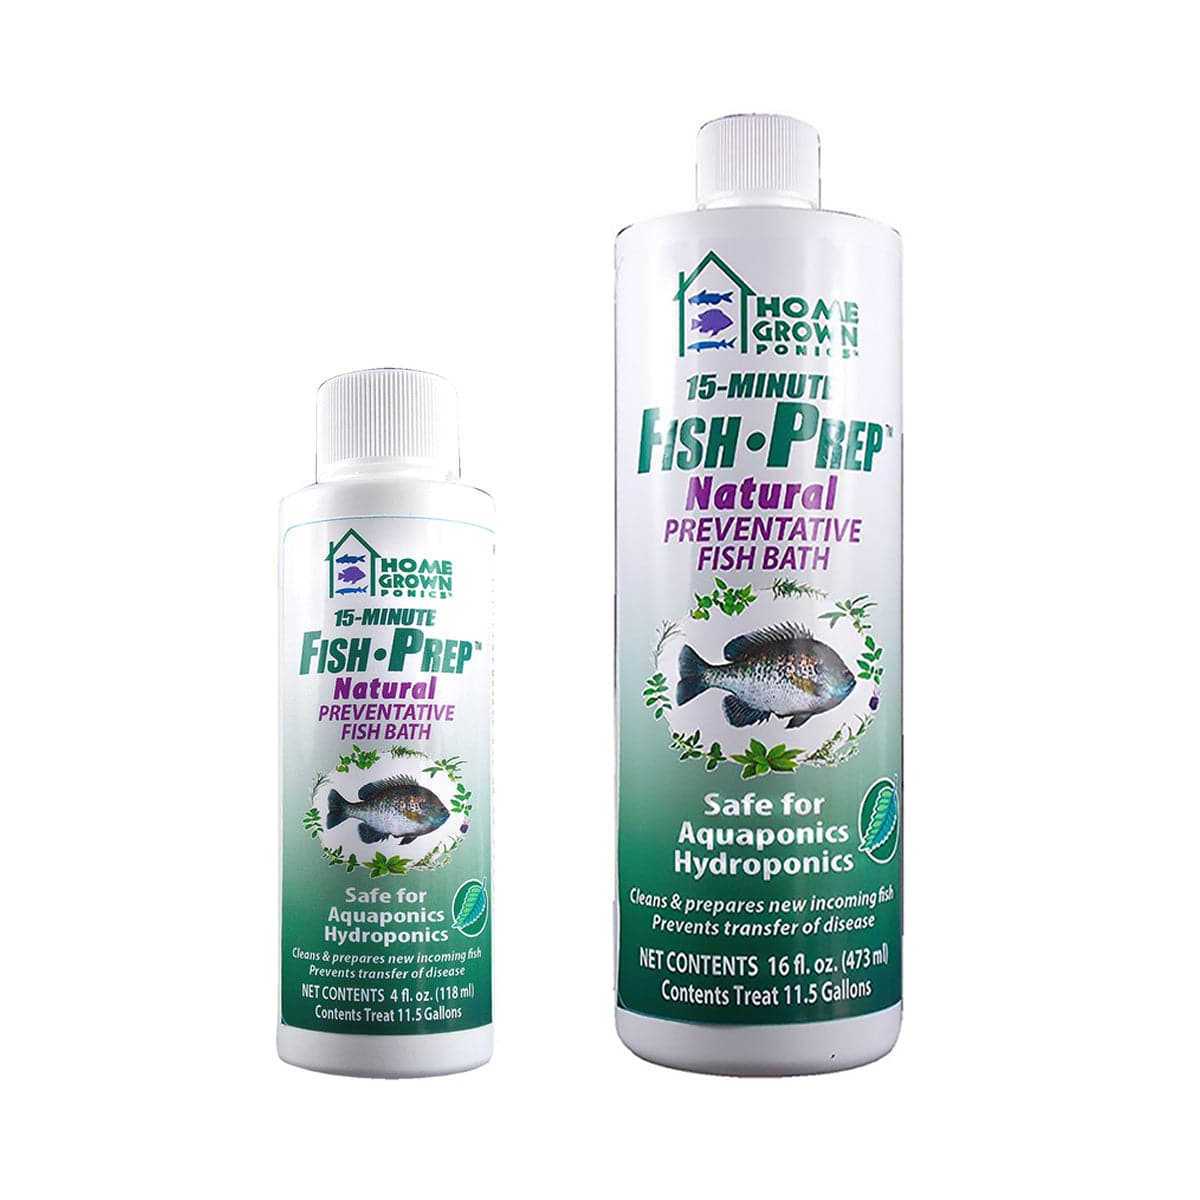 A bottle of TAS Fish Prep Preventative Fish Bath with natural soothing oils for therapeutic bath against fish disease.